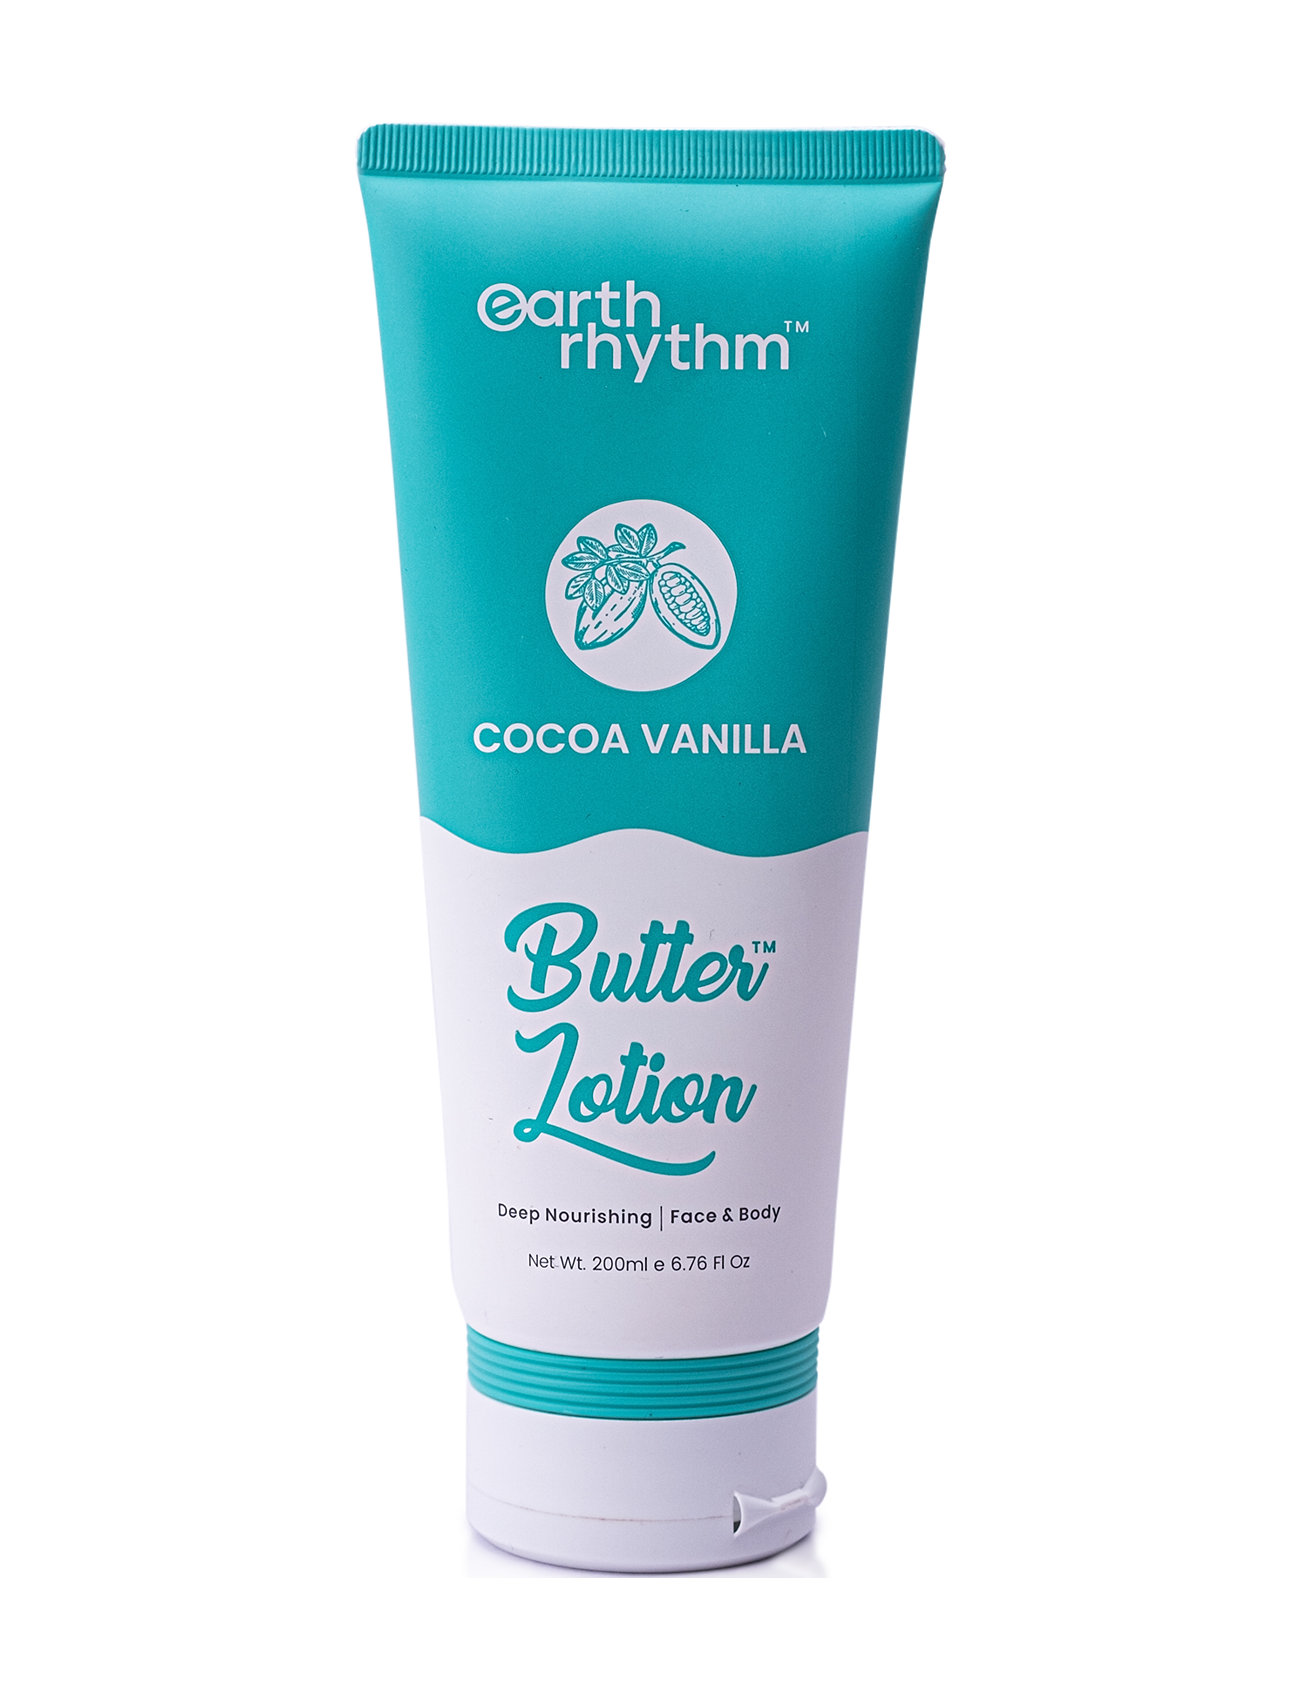 Cocoa Vanilla Butter Body Lotion Creme Lotion Bodybutter White Earth Rhythm